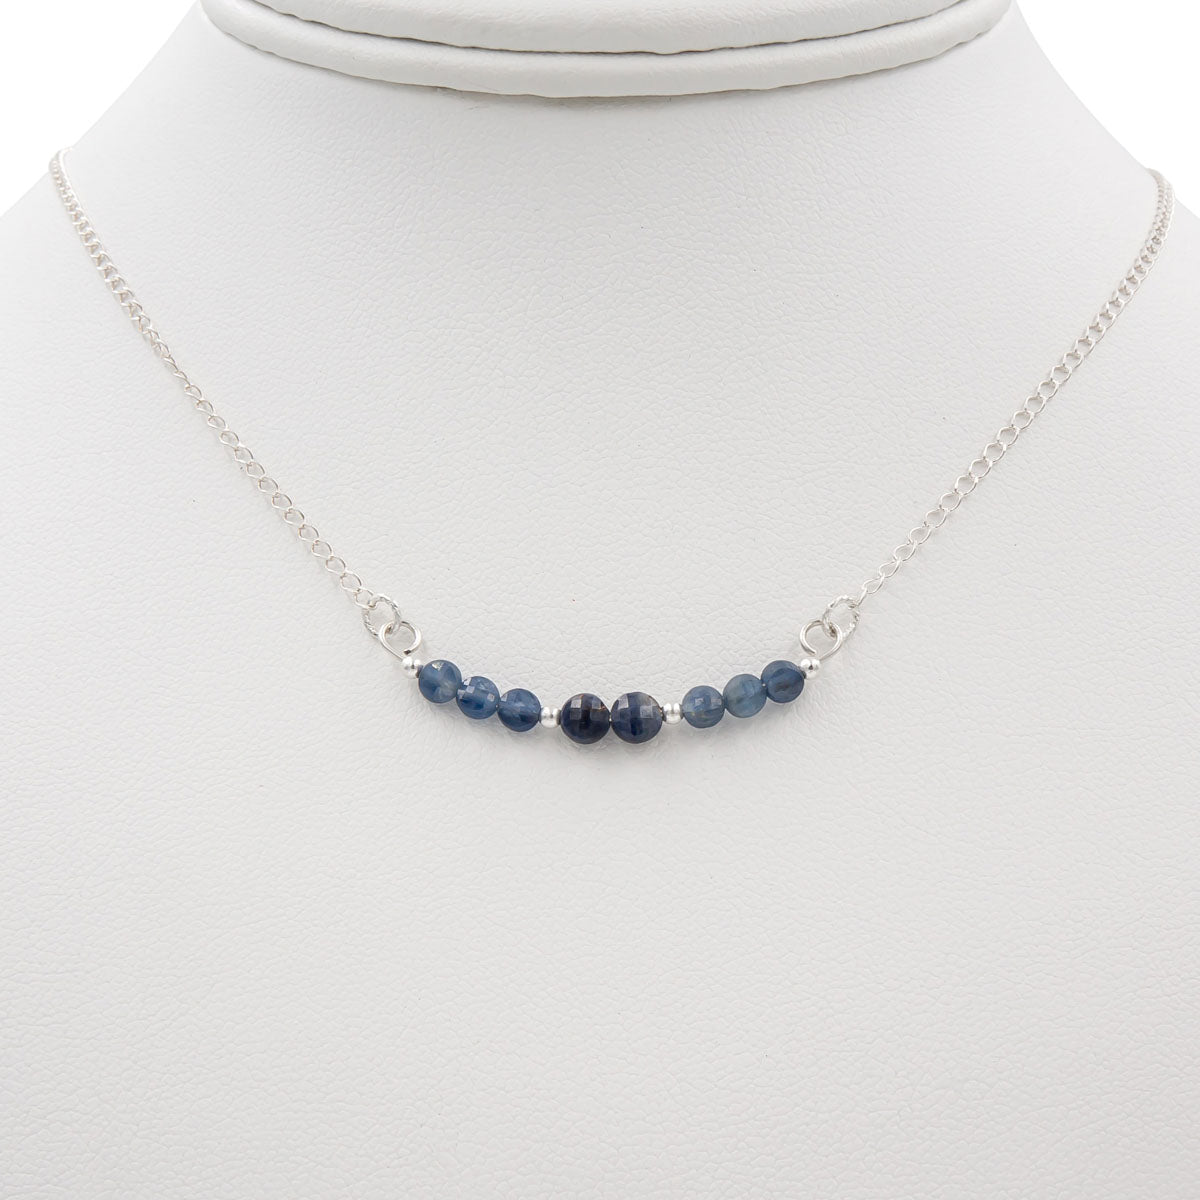 Handmade Sparkling Sapphires Necklace - Earth Song Jewelry 2